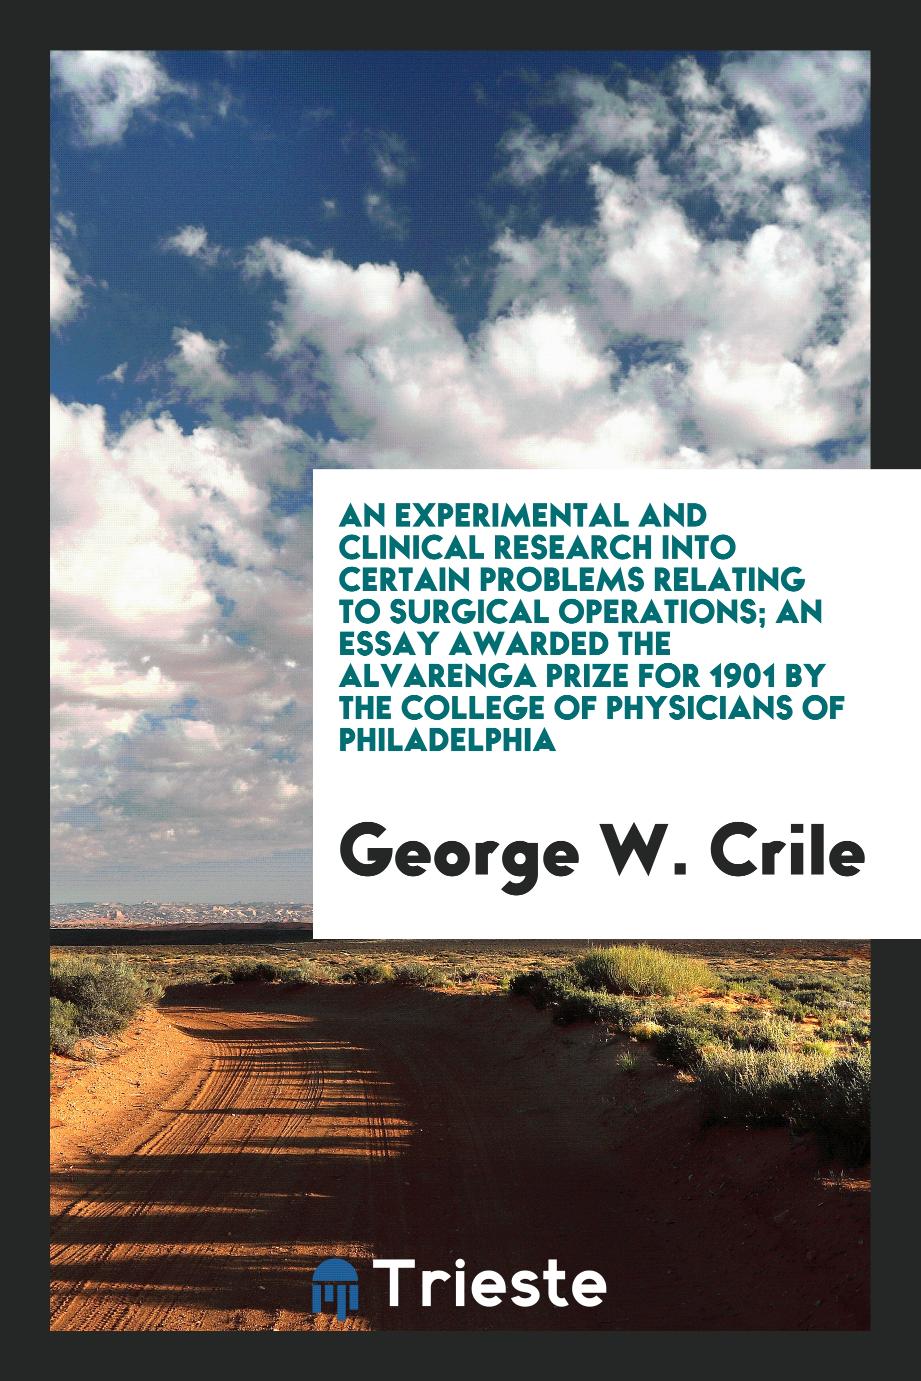 An experimental and clinical research into certain problems relating to surgical operations; an essay awarded the Alvarenga prize for 1901 by the College of physicians of Philadelphia